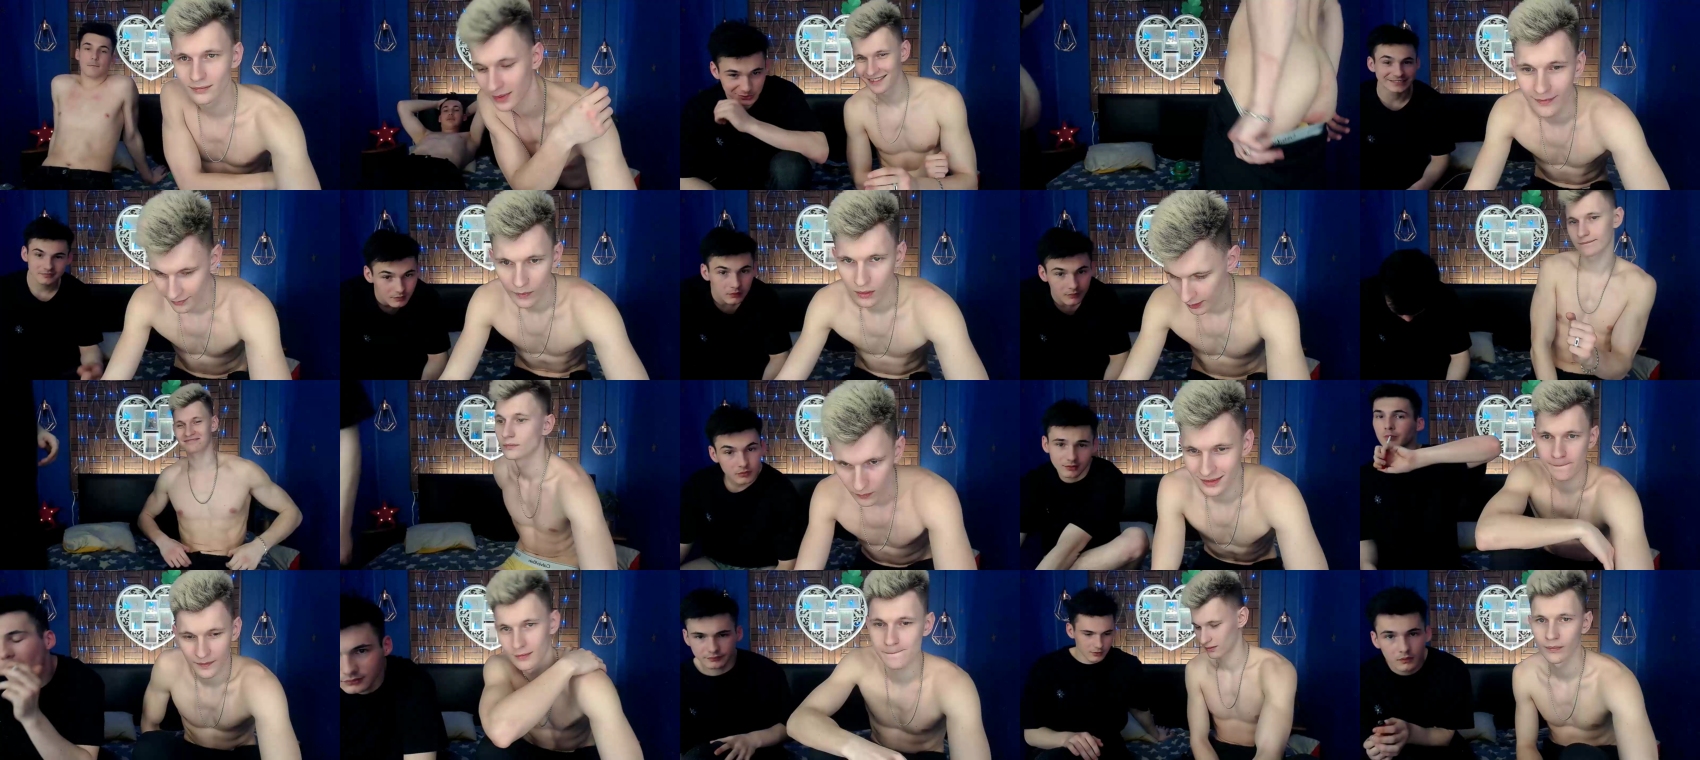 kevin_ringer play CAM SHOW @ Chaturbate 19-03-2022